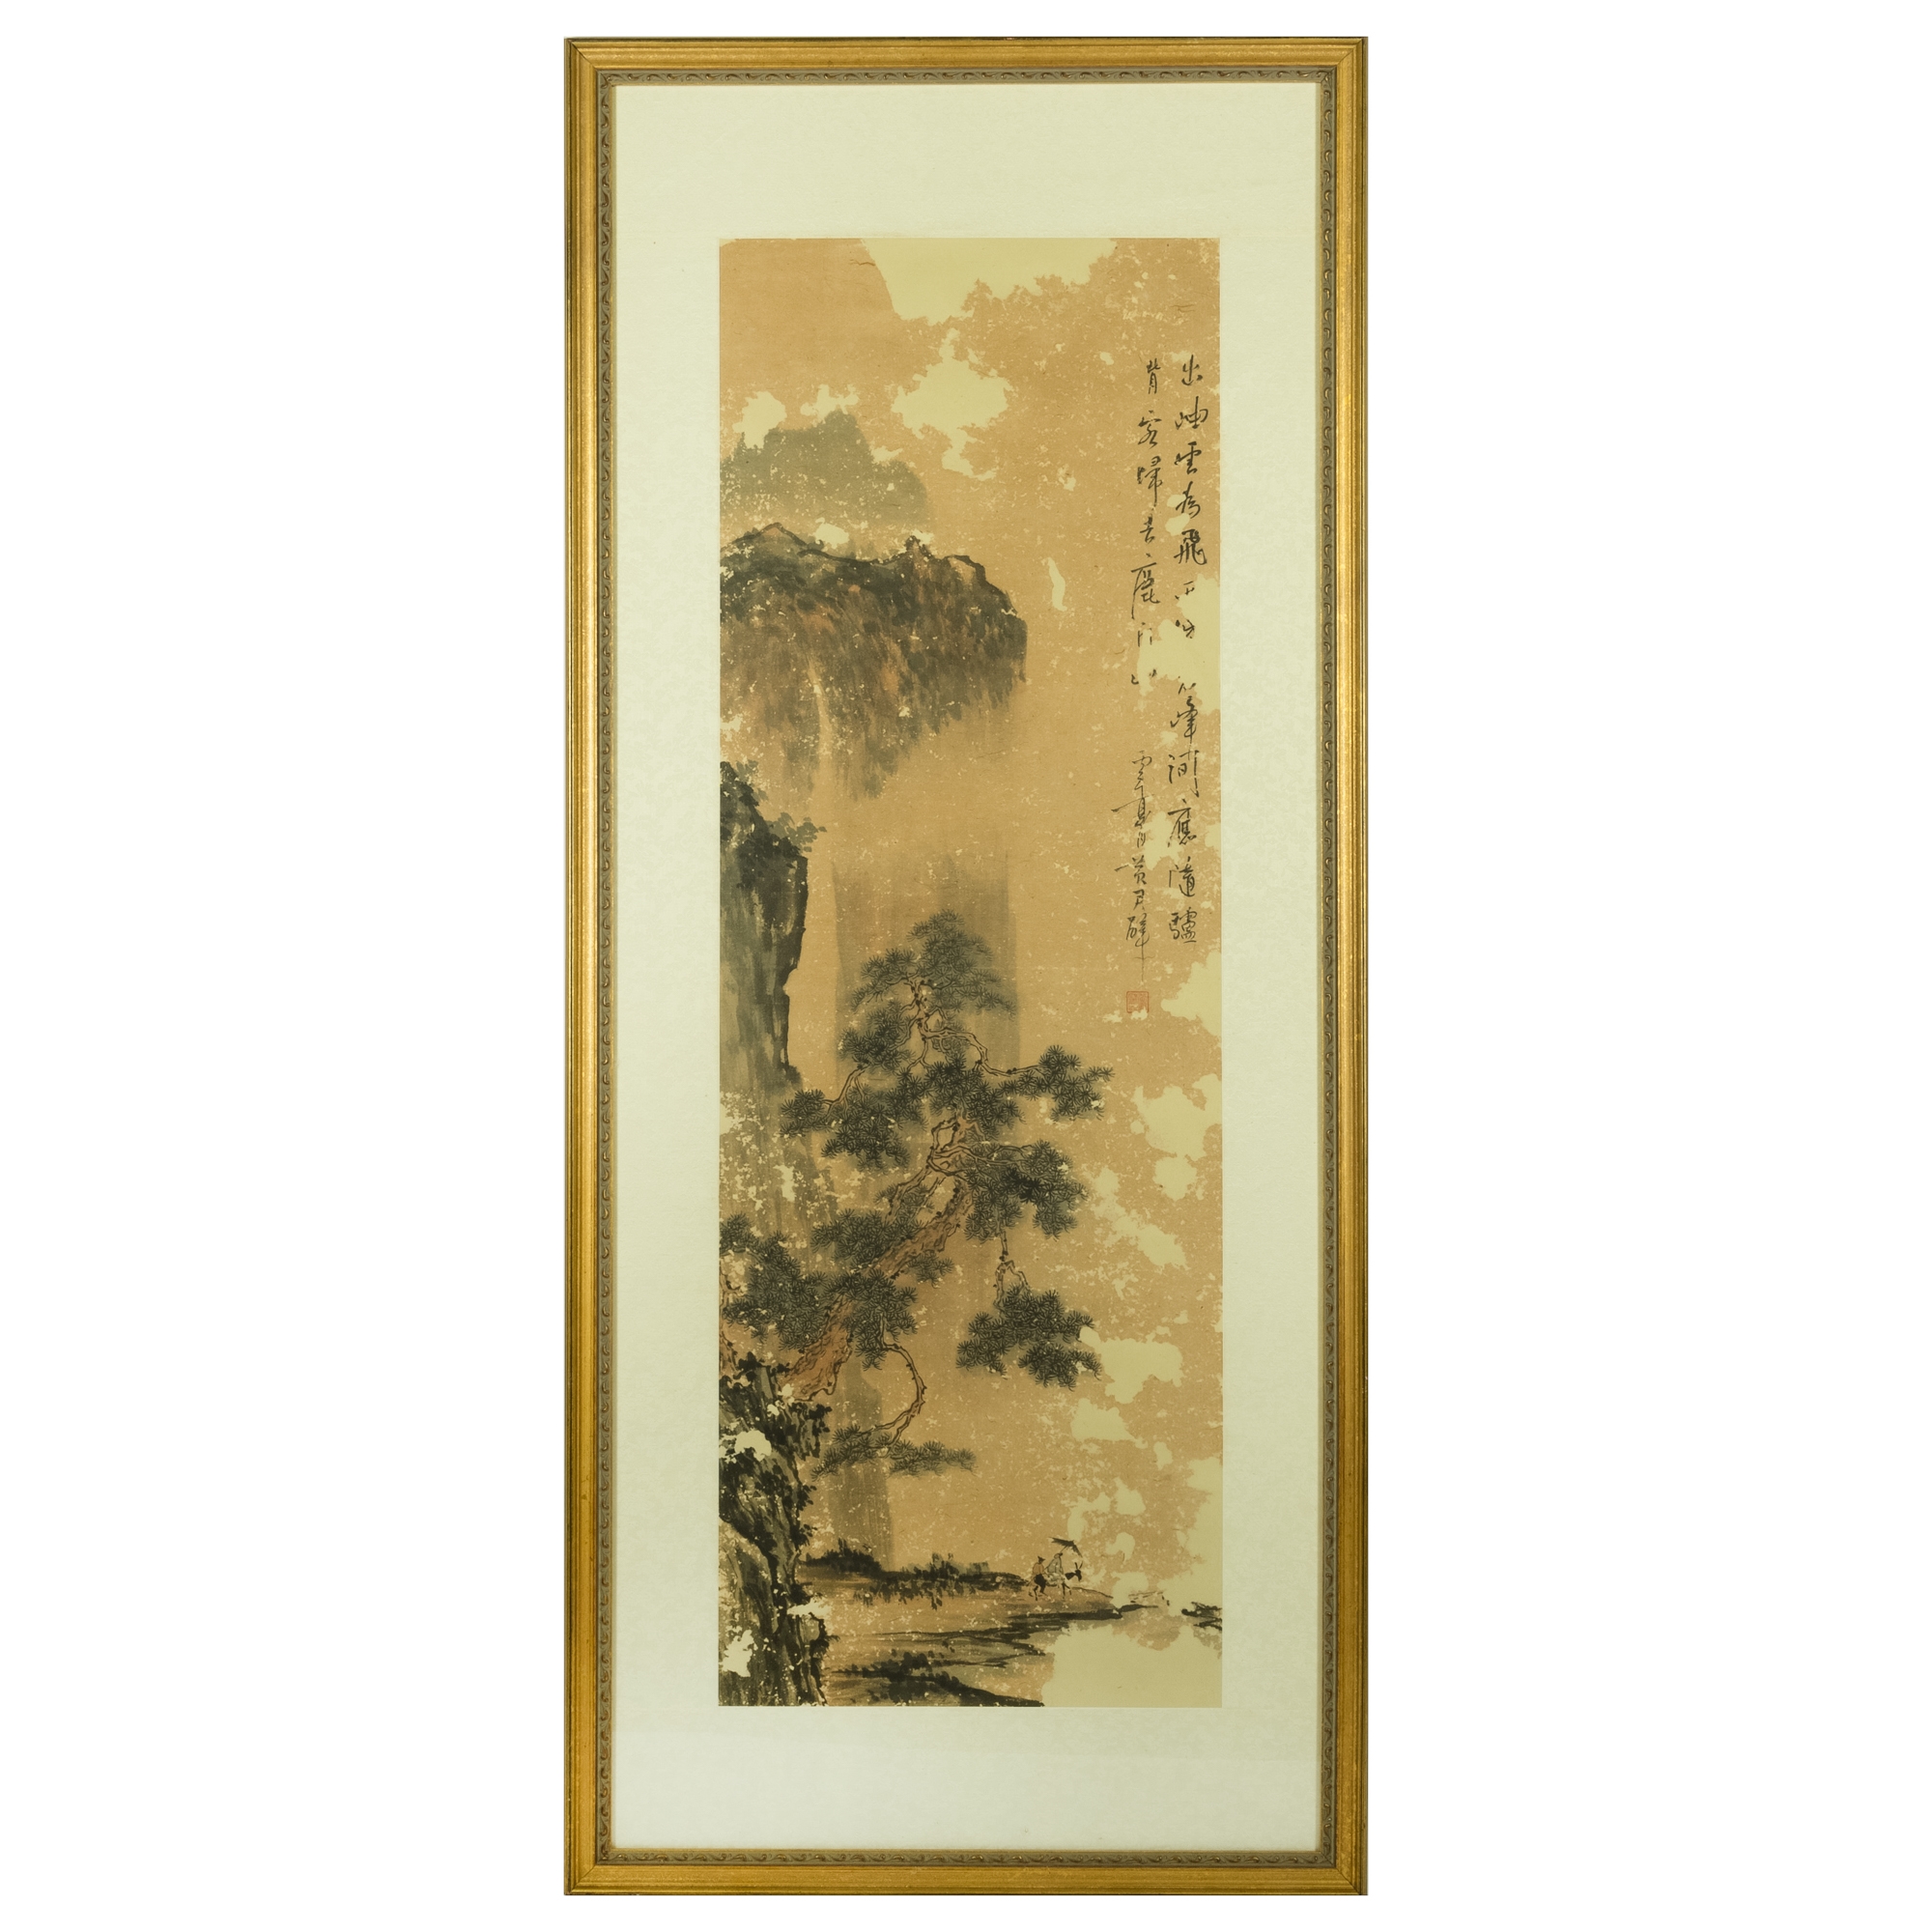 A Chinese 'landscape' painting, by Huang Junbi (Chinese, 1898-1991 by Huang Junbi